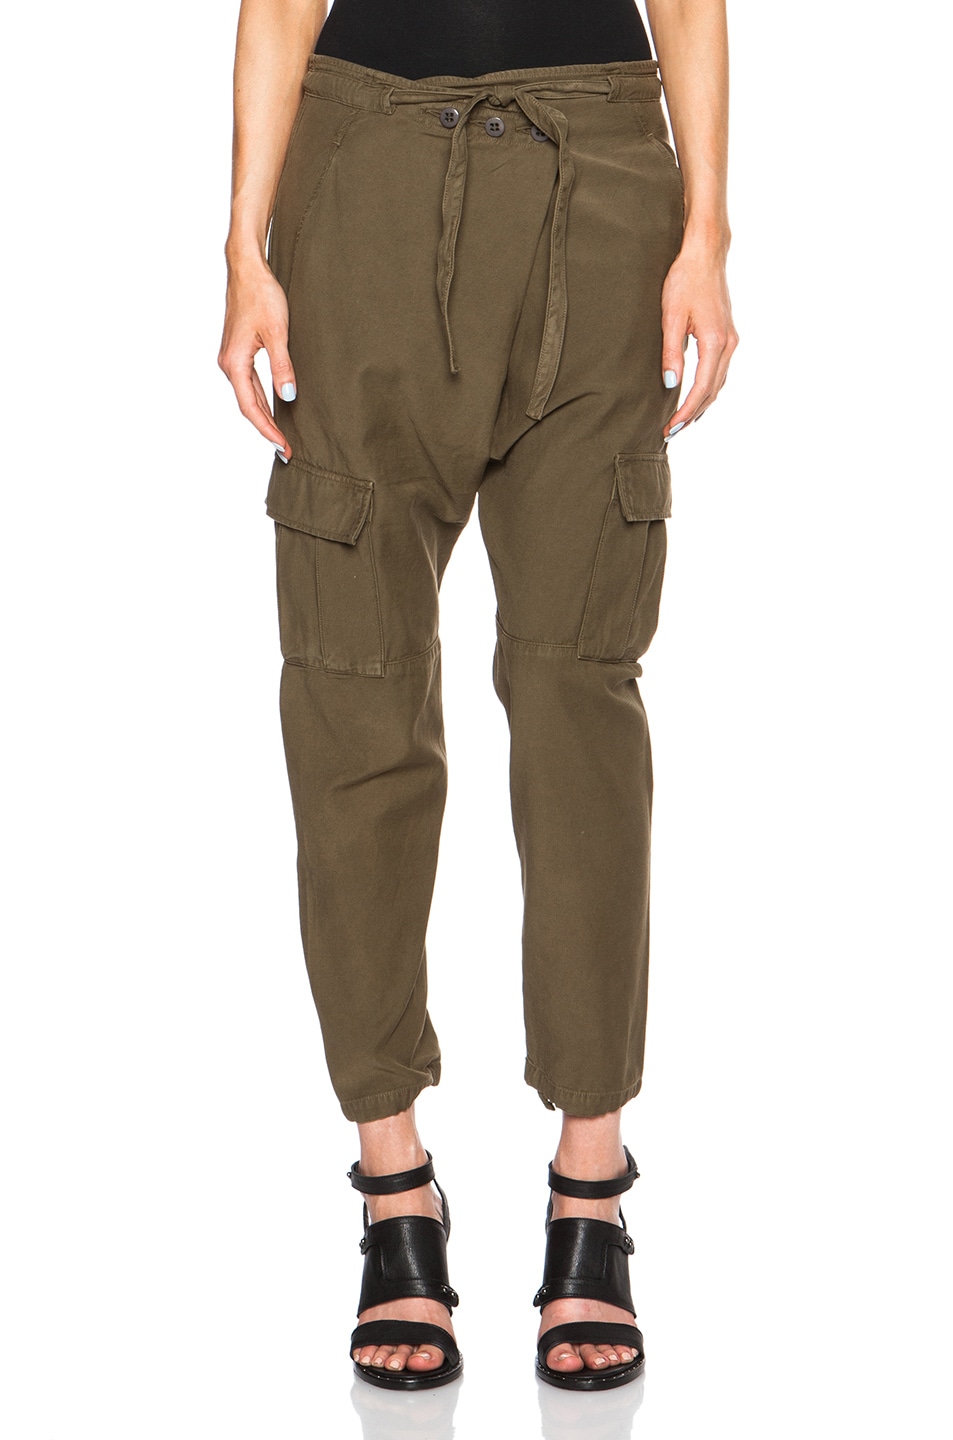 Image 1 of Citizens of Humanity Casbah Cargo Pants in Vintage Fatigue